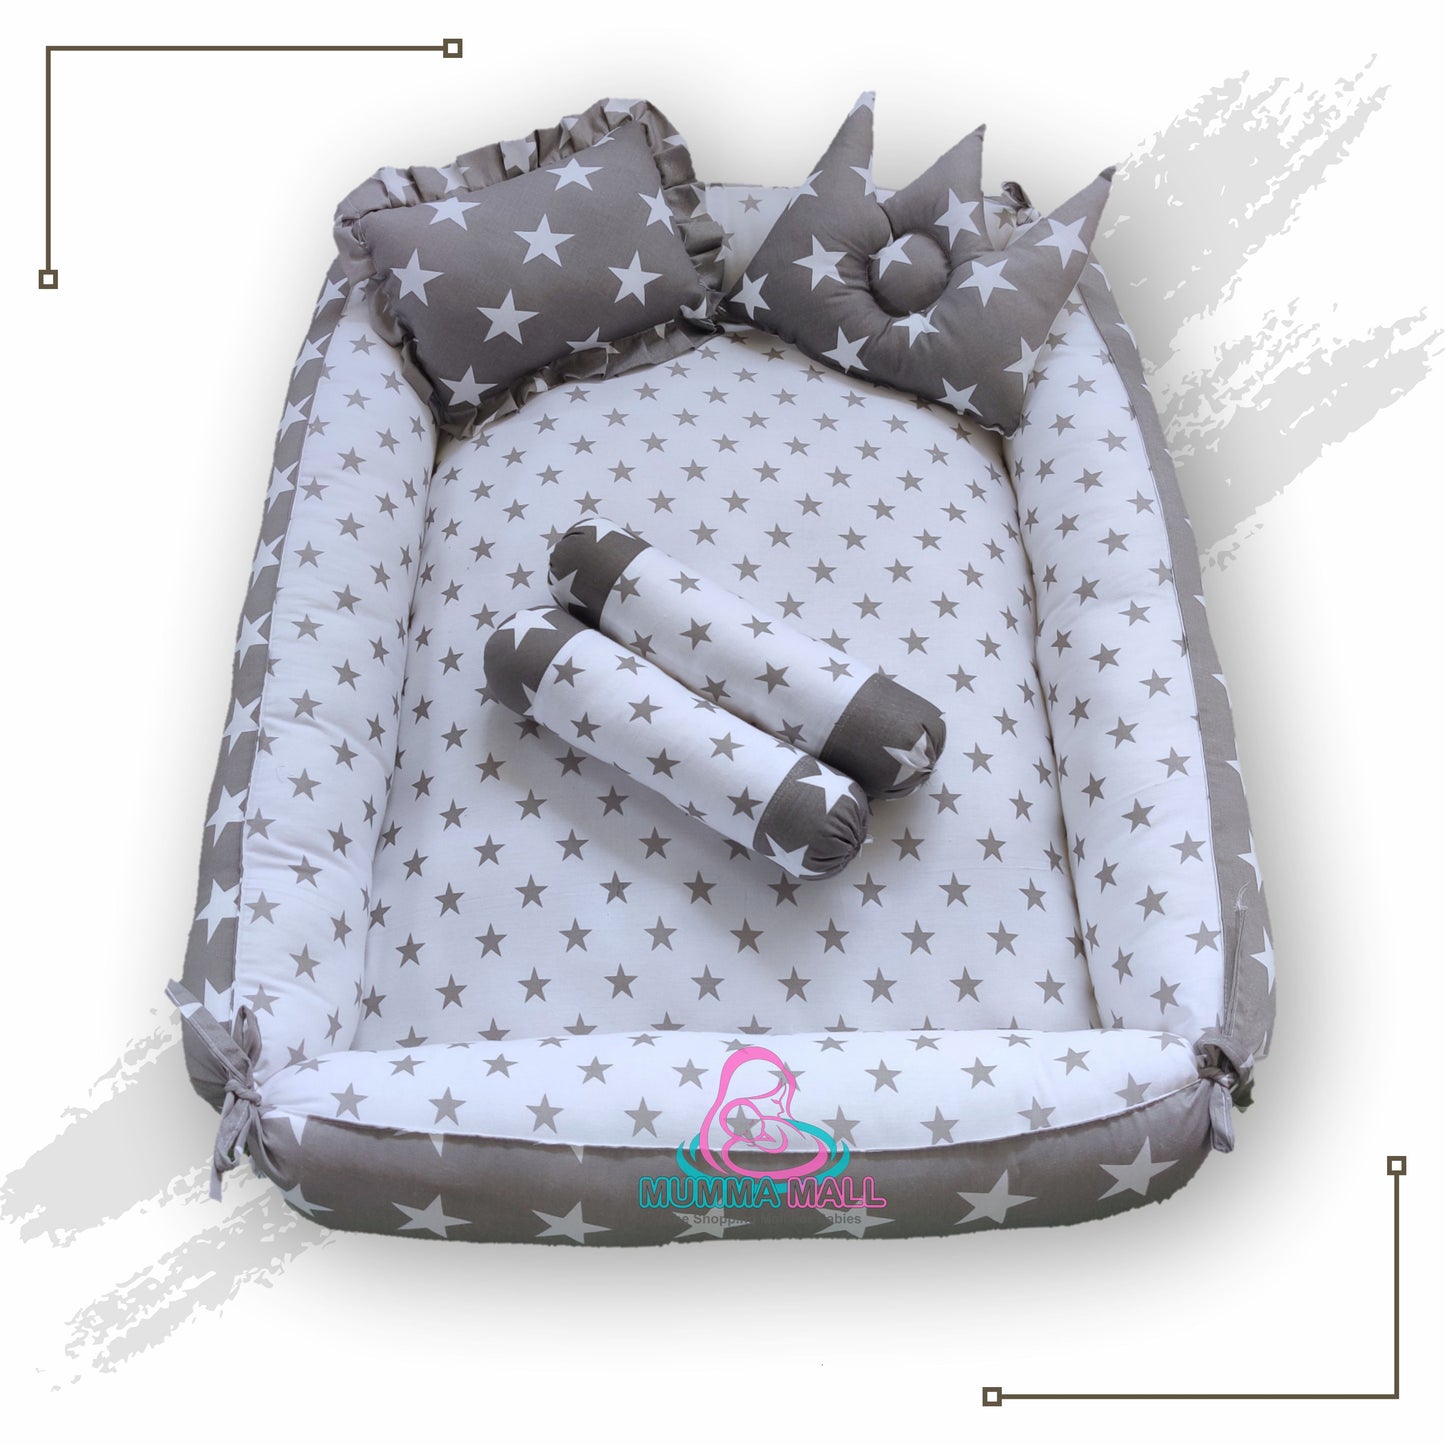 Baby box mattress with blanket and set of 4 pillows as neck support, side support and toy (Grey and White)